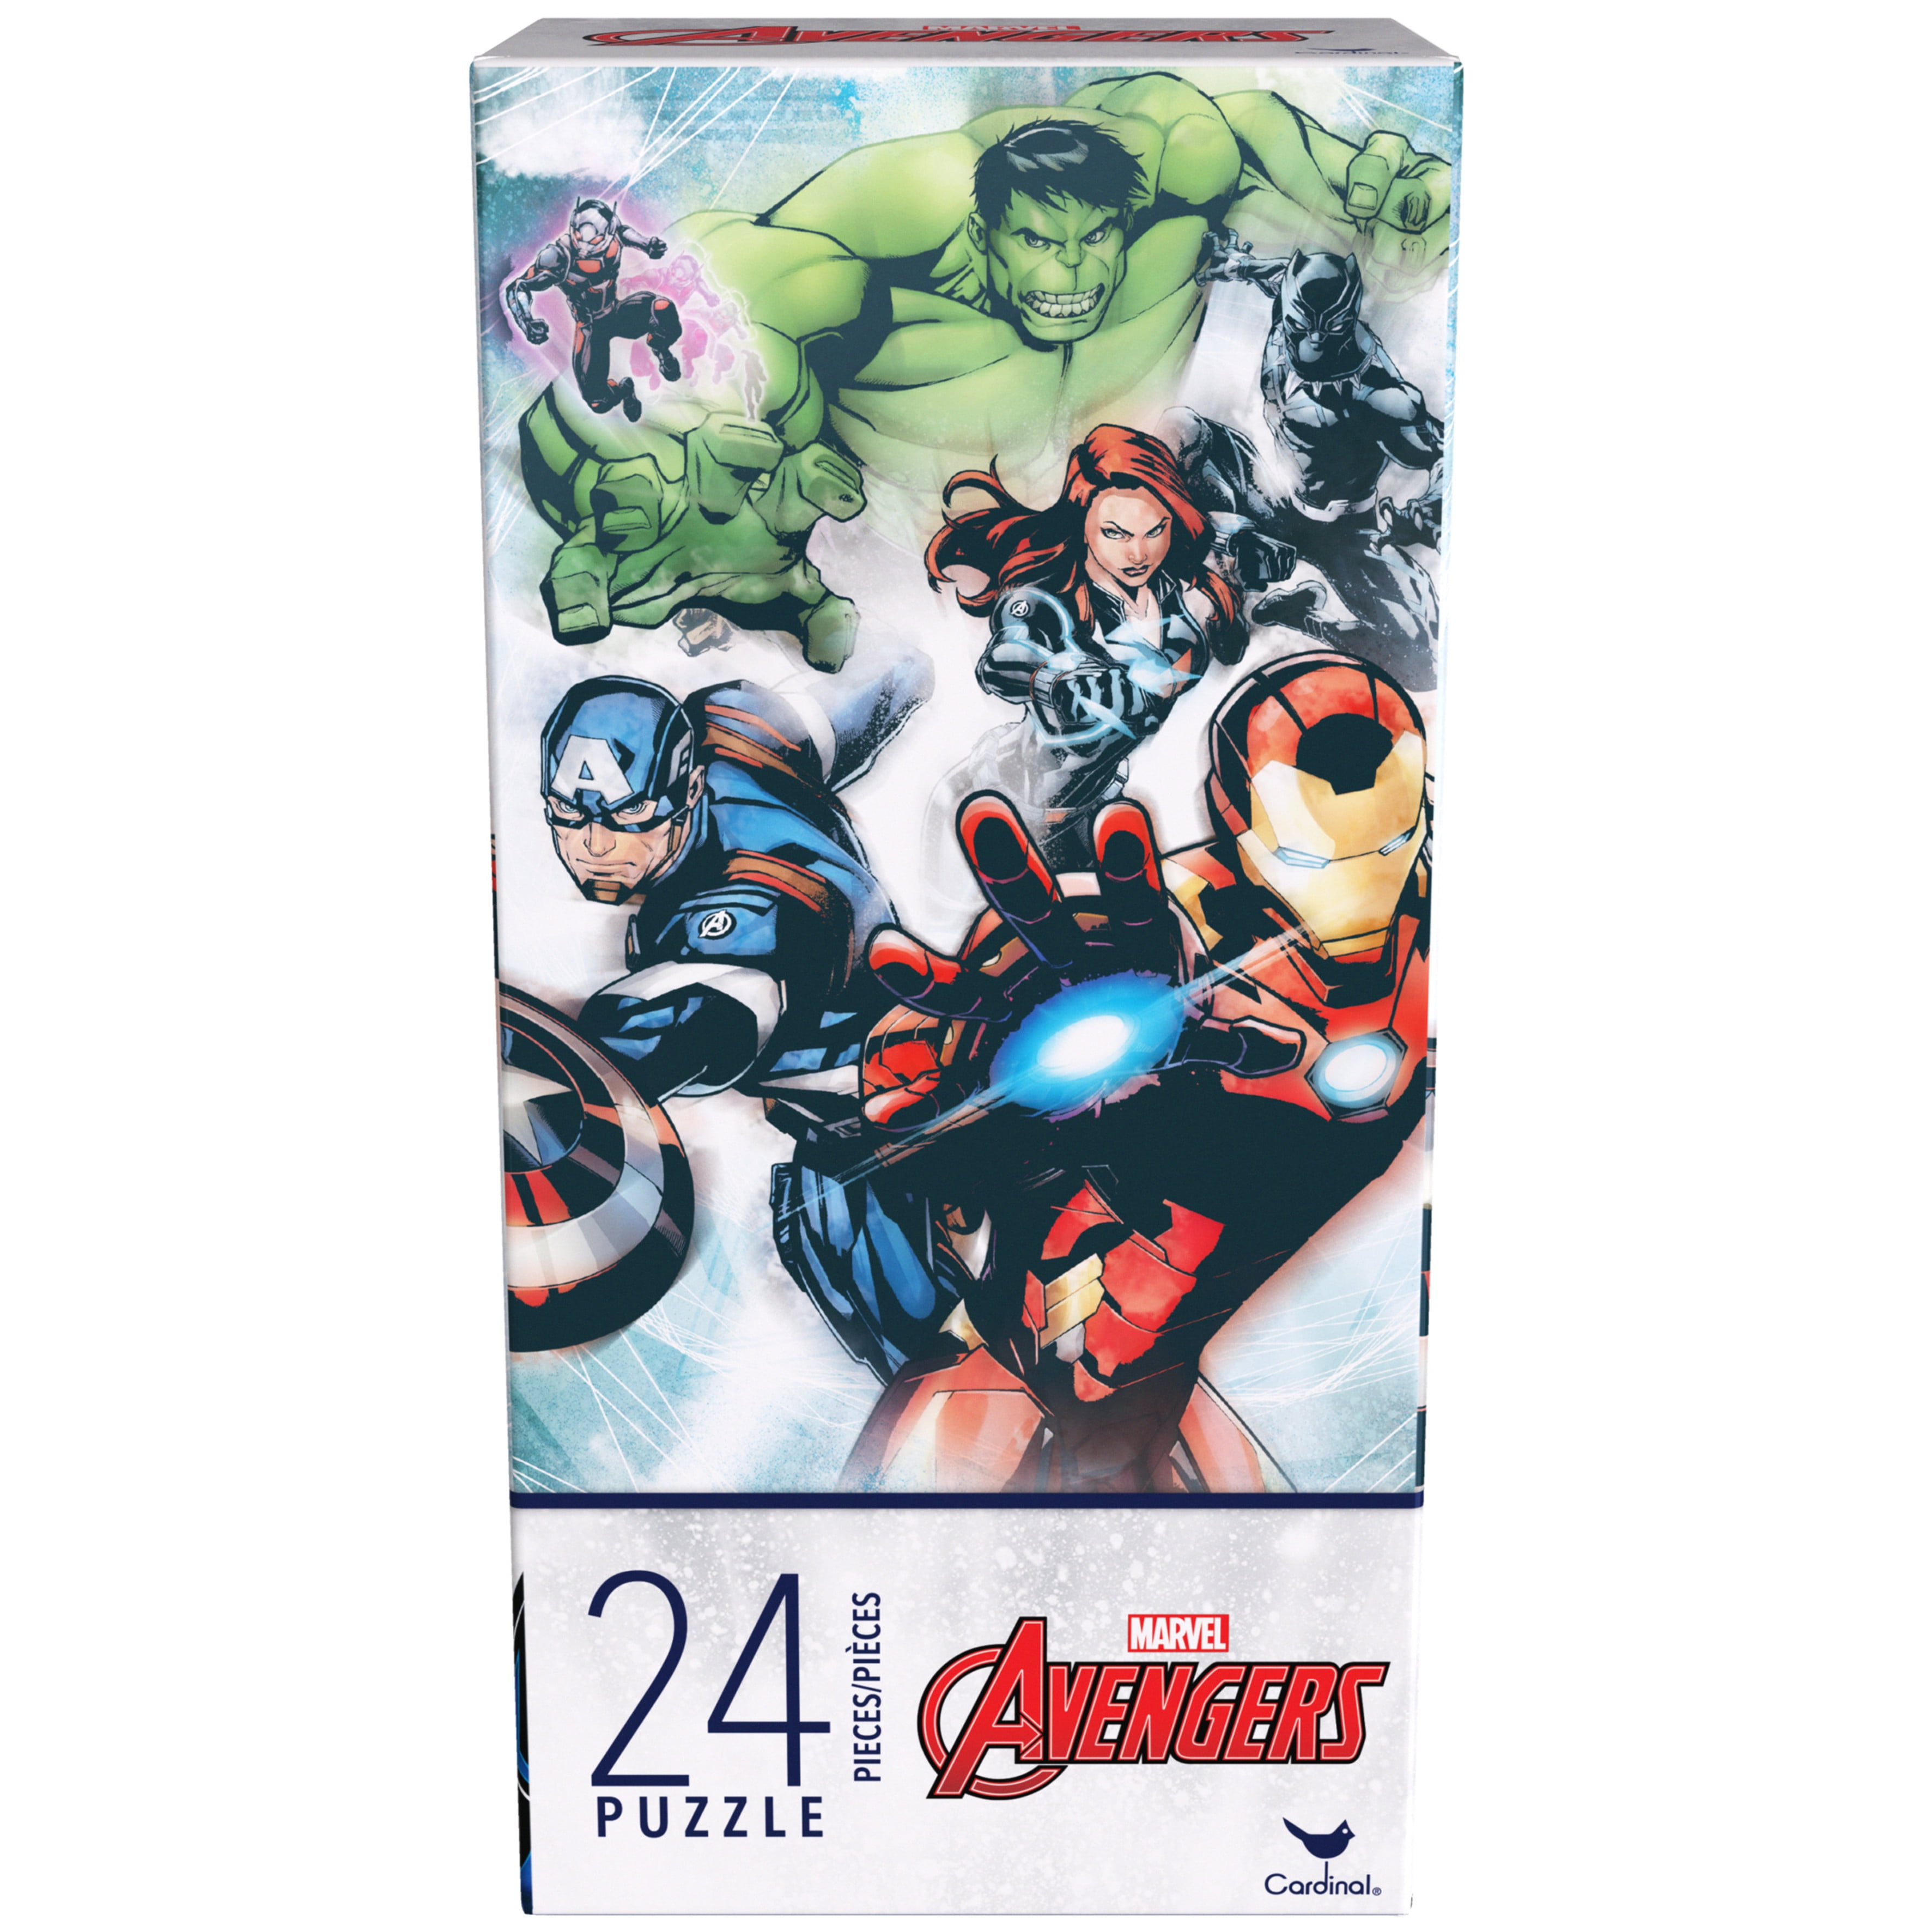 Avengers 24-Piece Jigsaw Puzzle for Kids Ages 4 and up